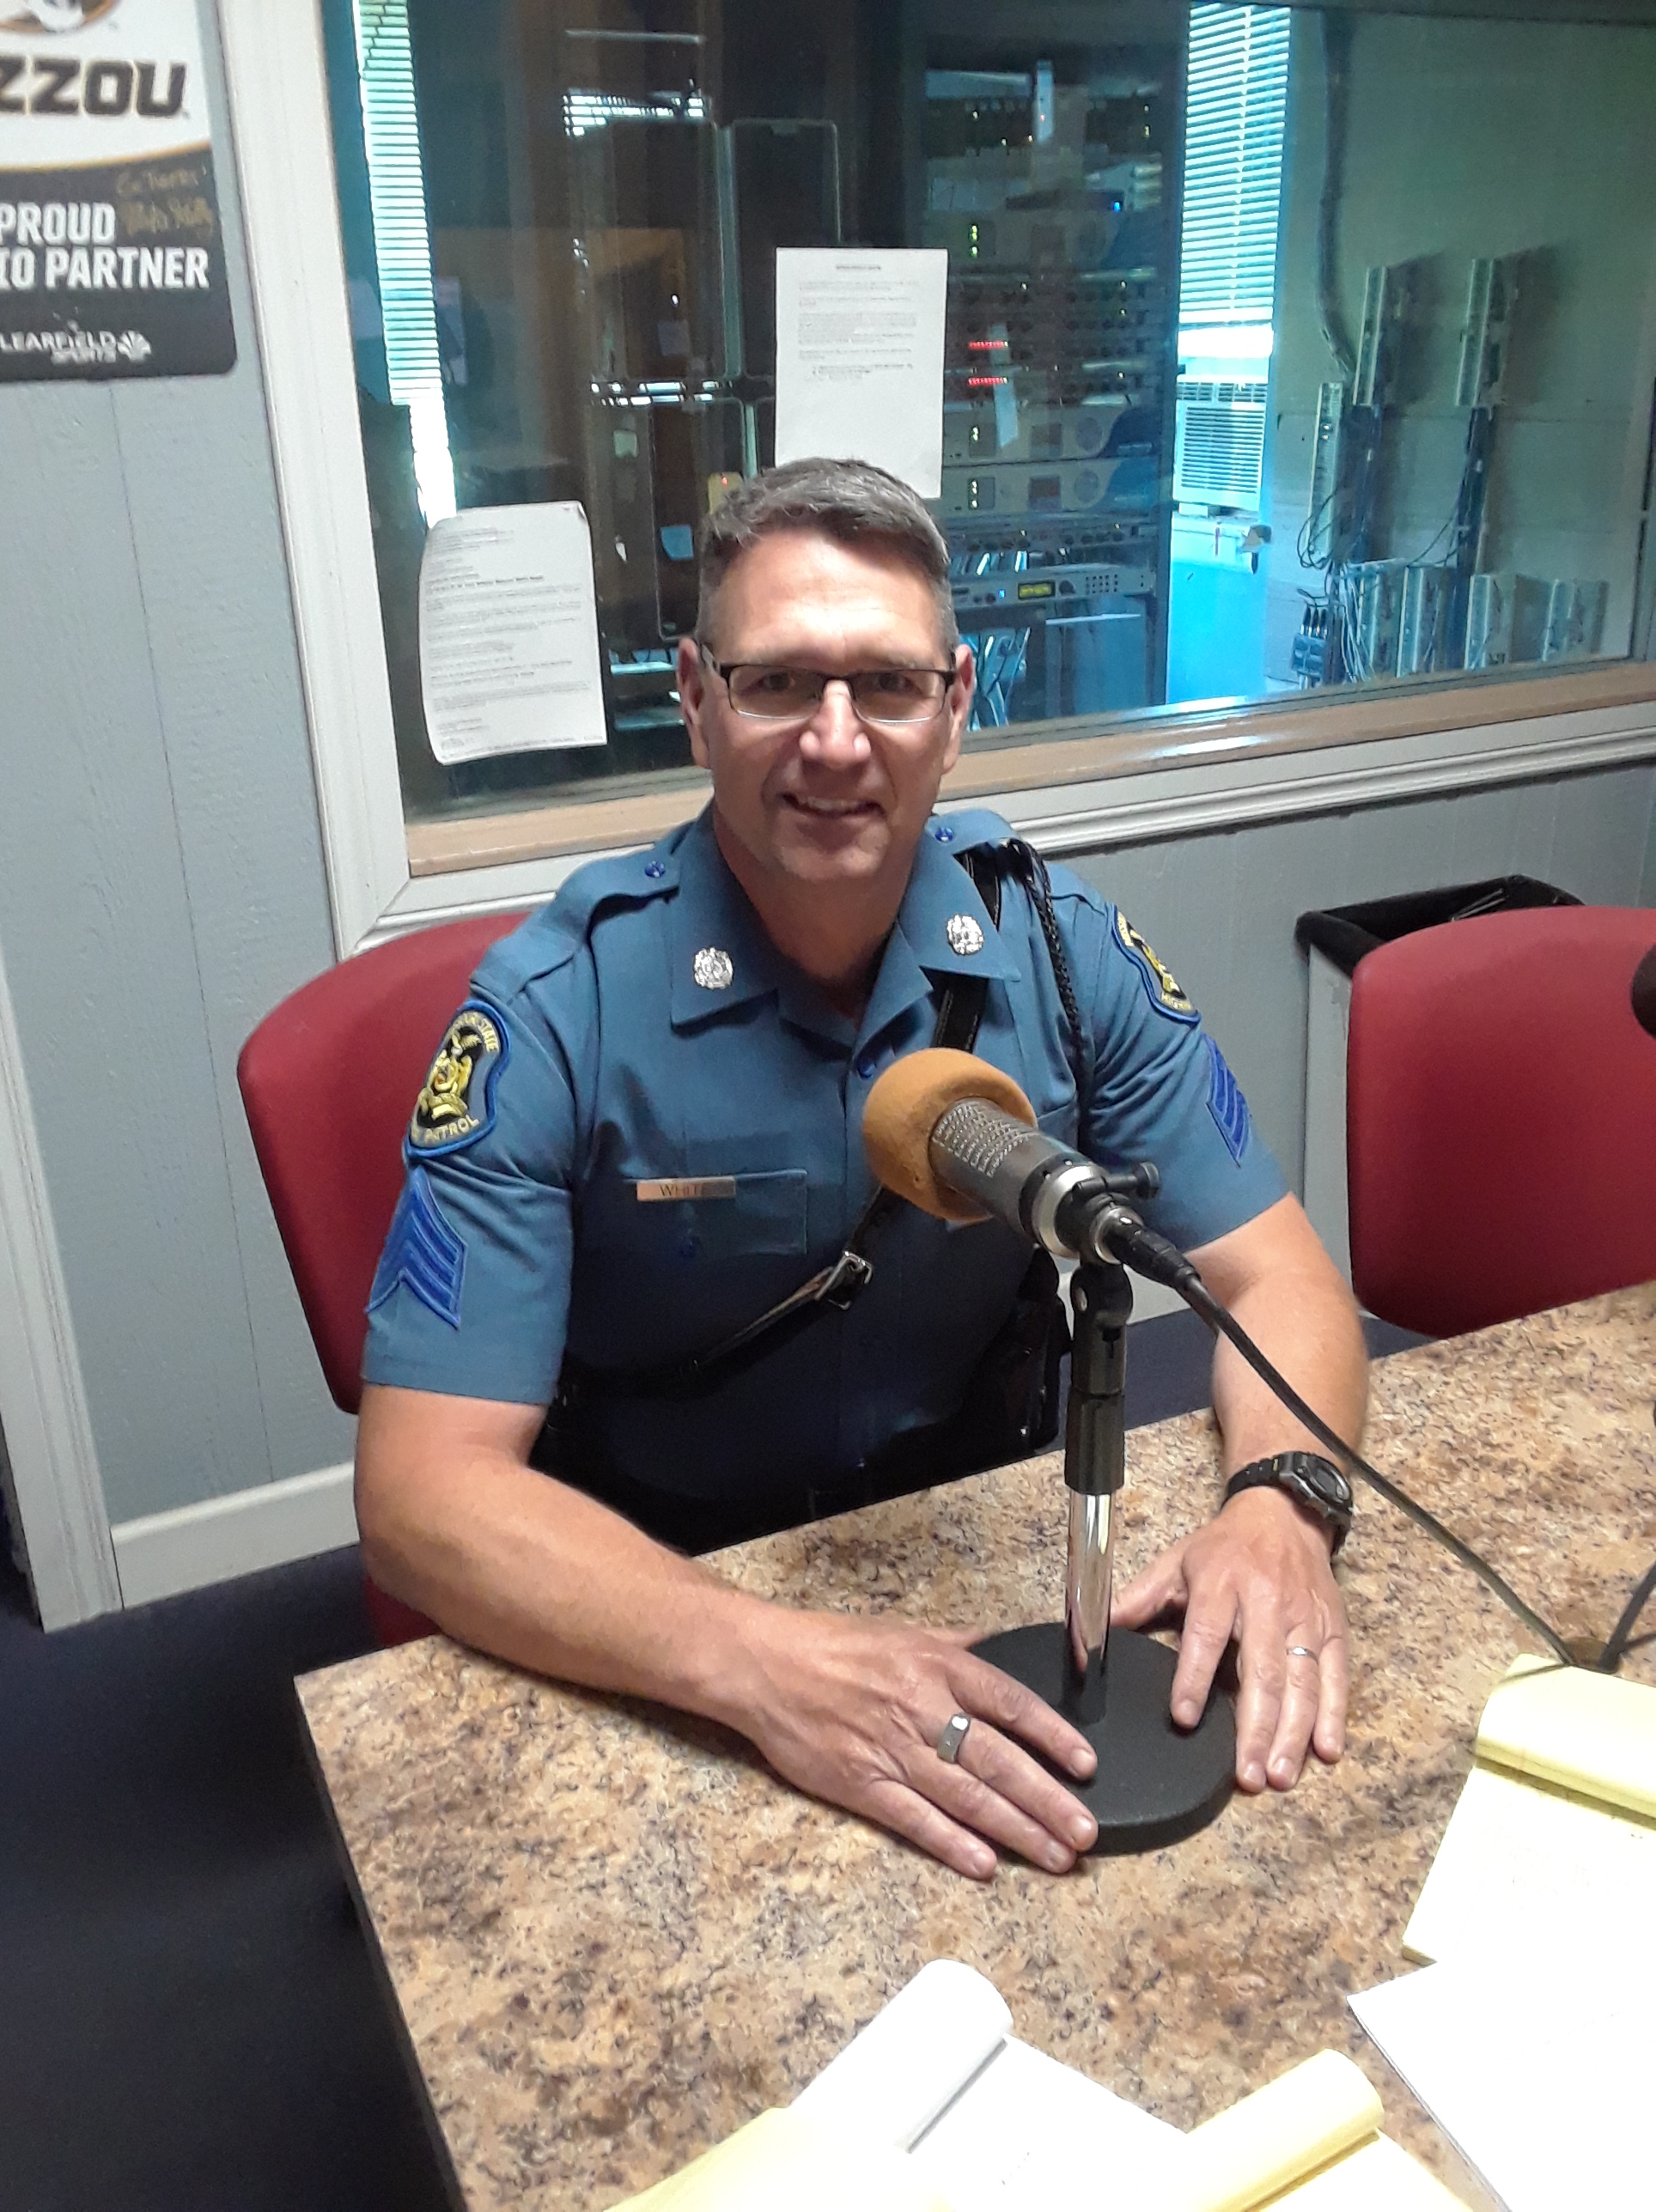 Sgt. Scott White Of The Missouri State Highway Patrol Joins Public Perspectives